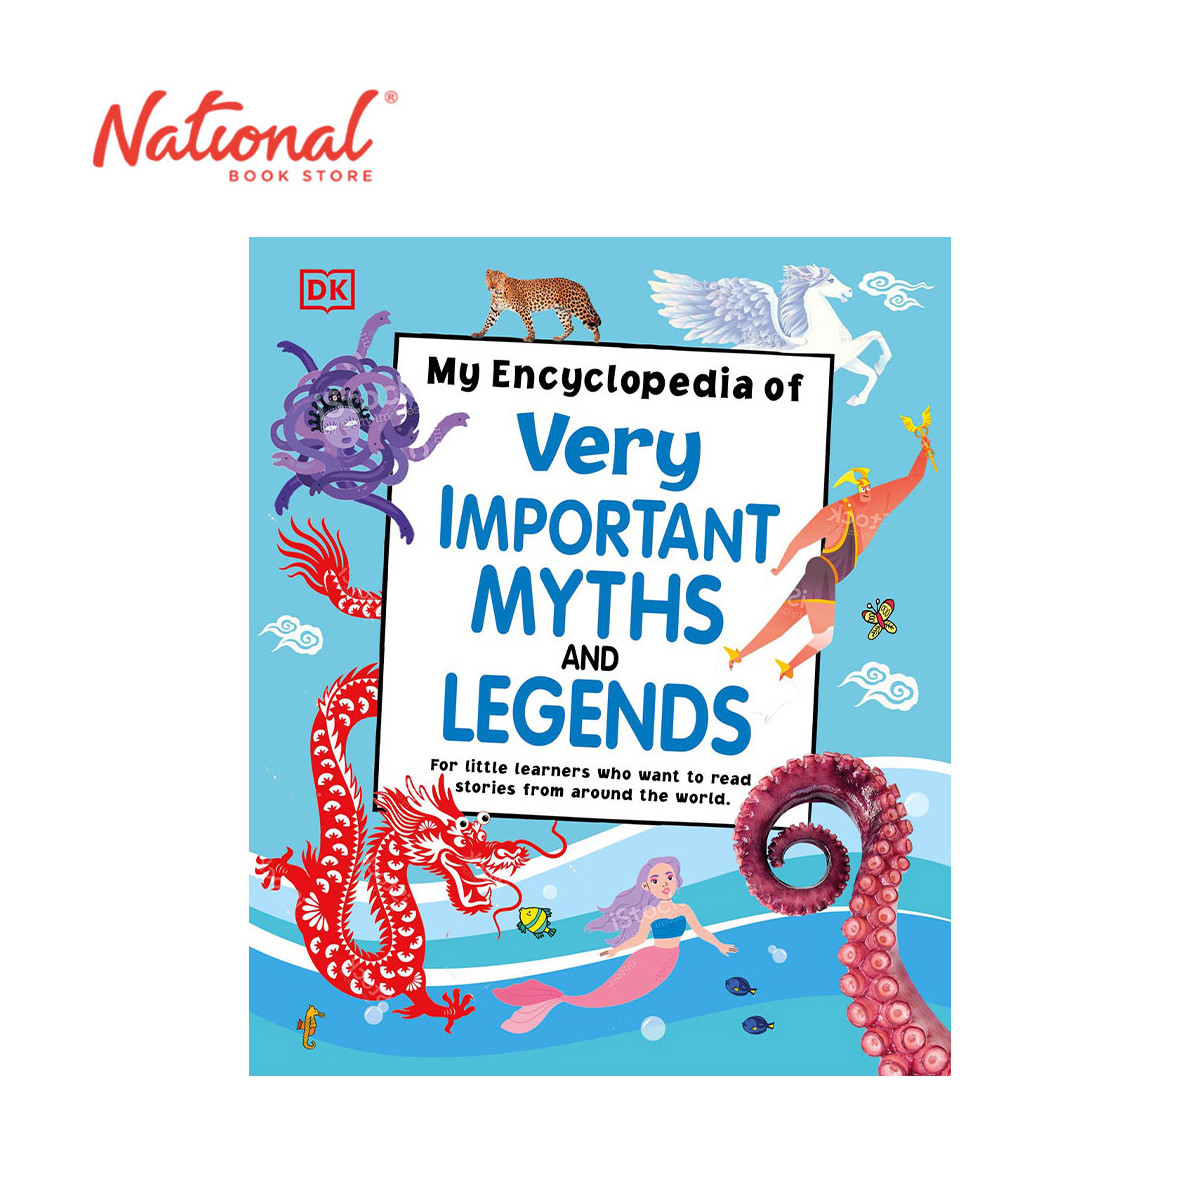 *PRE-ORDER* My Encyclopedia Of Very Important Myths & Legends by DK - Hardcover - Children's Reference